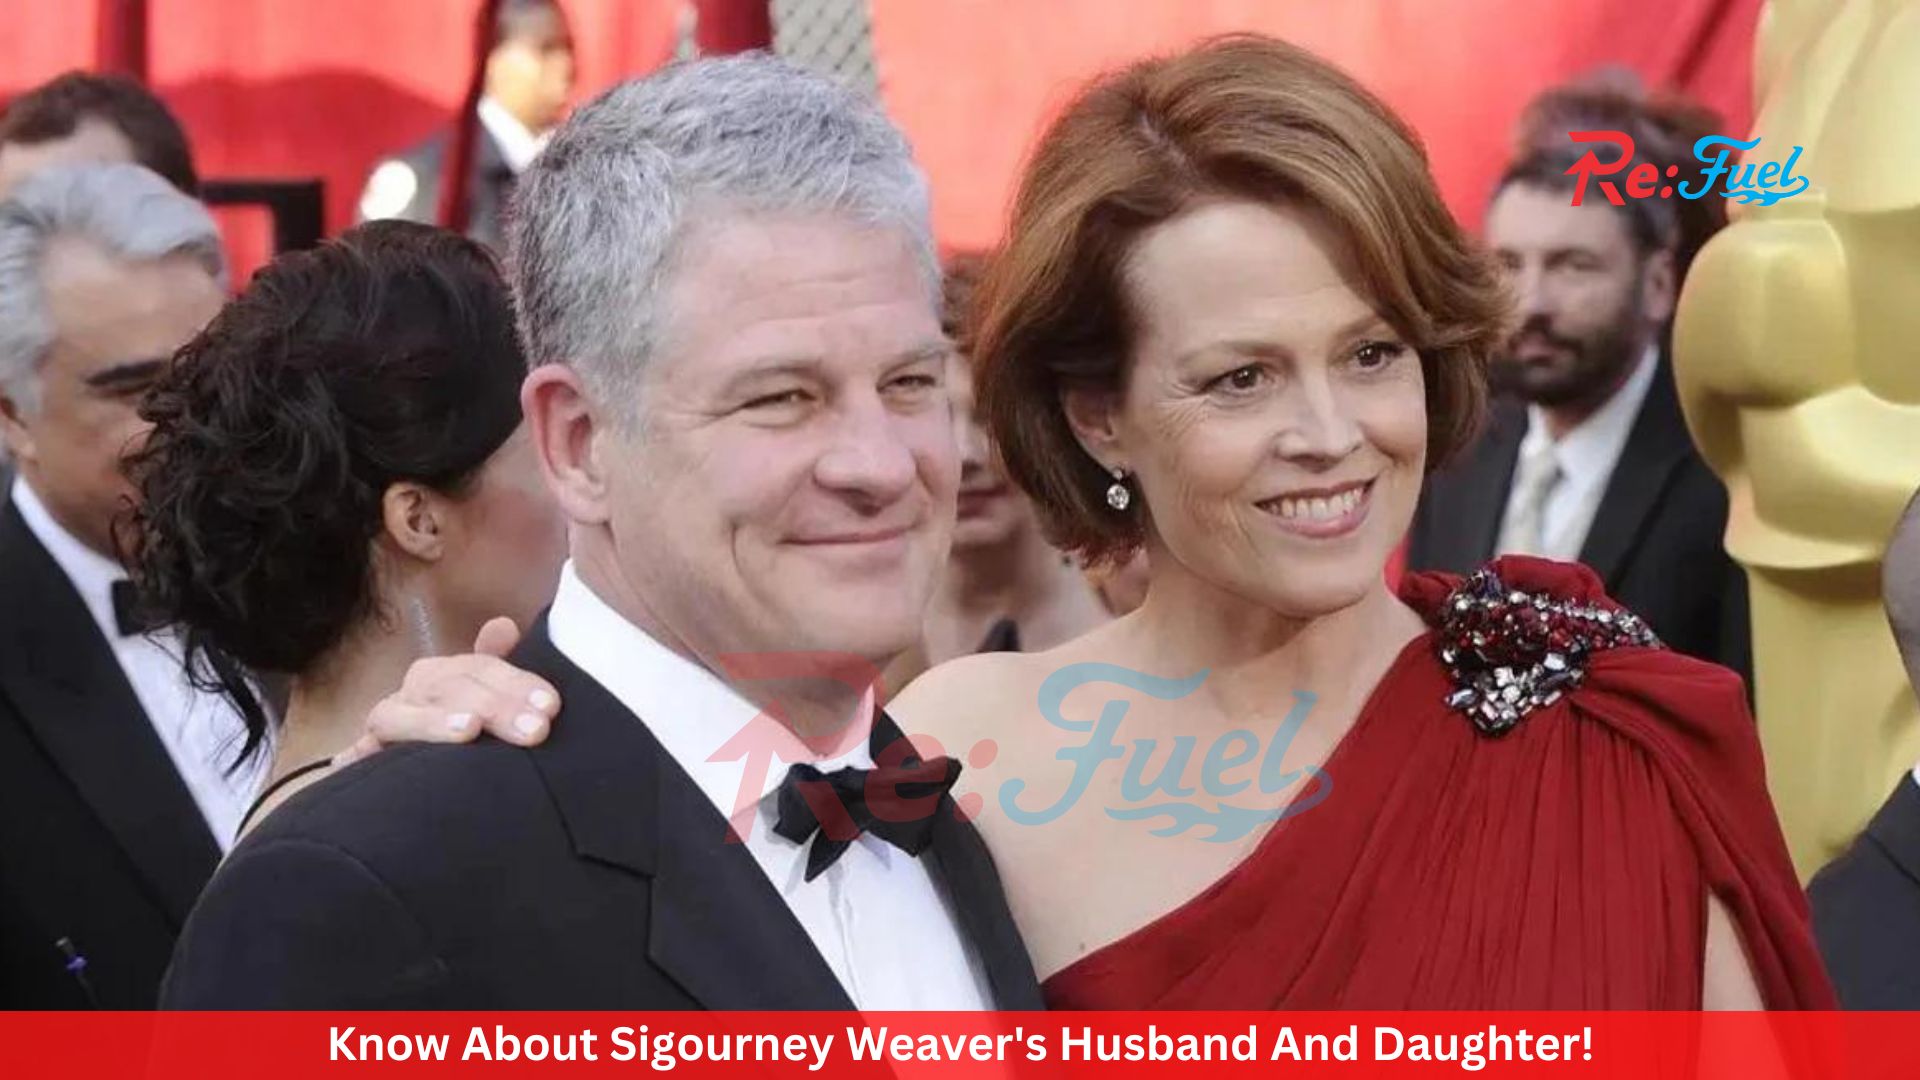 Know About Sigourney Weaver's Husband And Daughter!